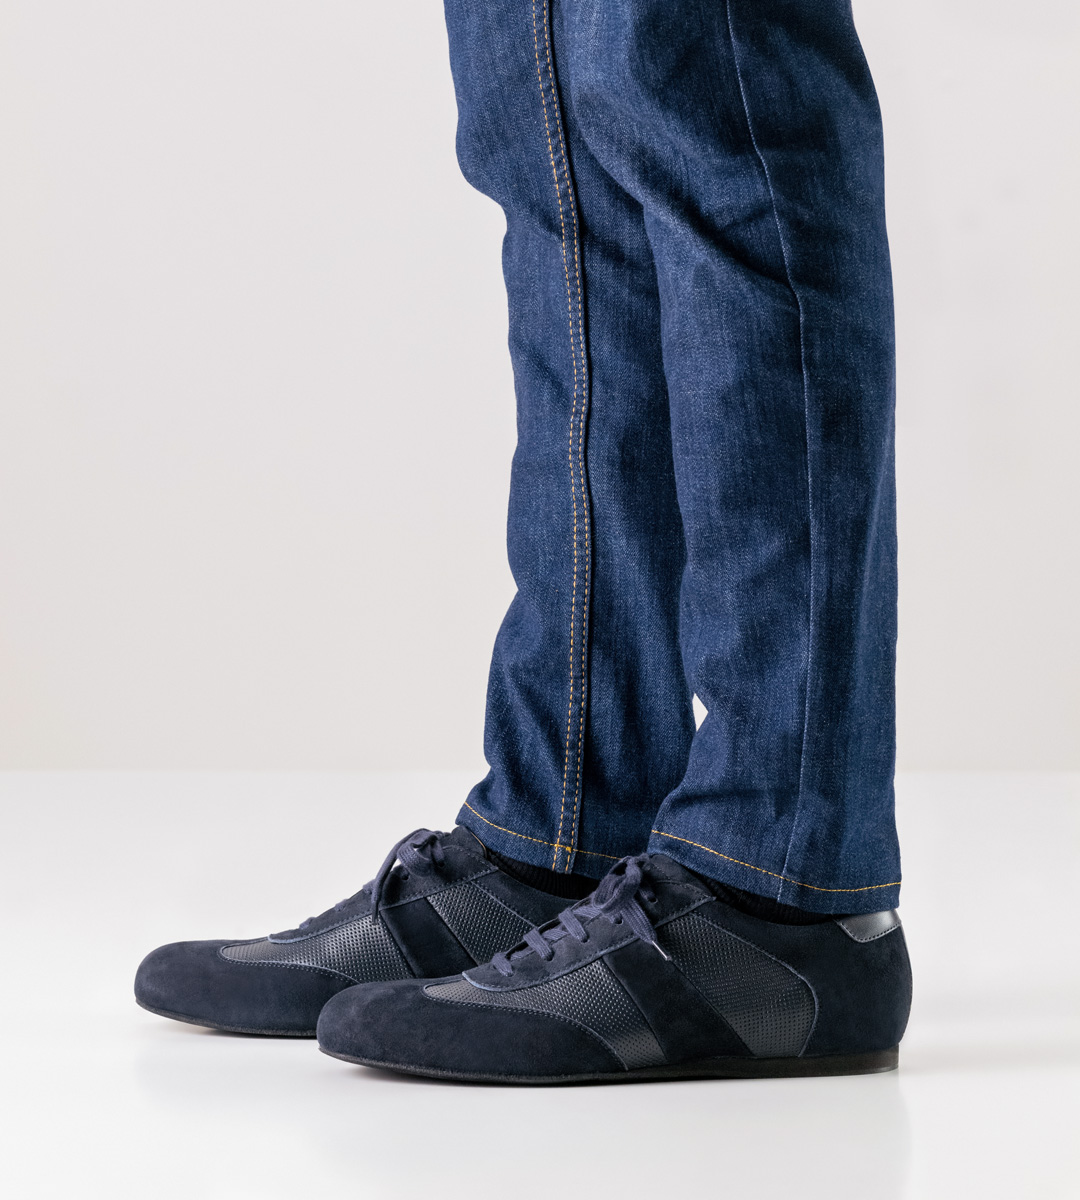 Werner Kern dance shoe sneakers for men in blue in combination with blue jeans